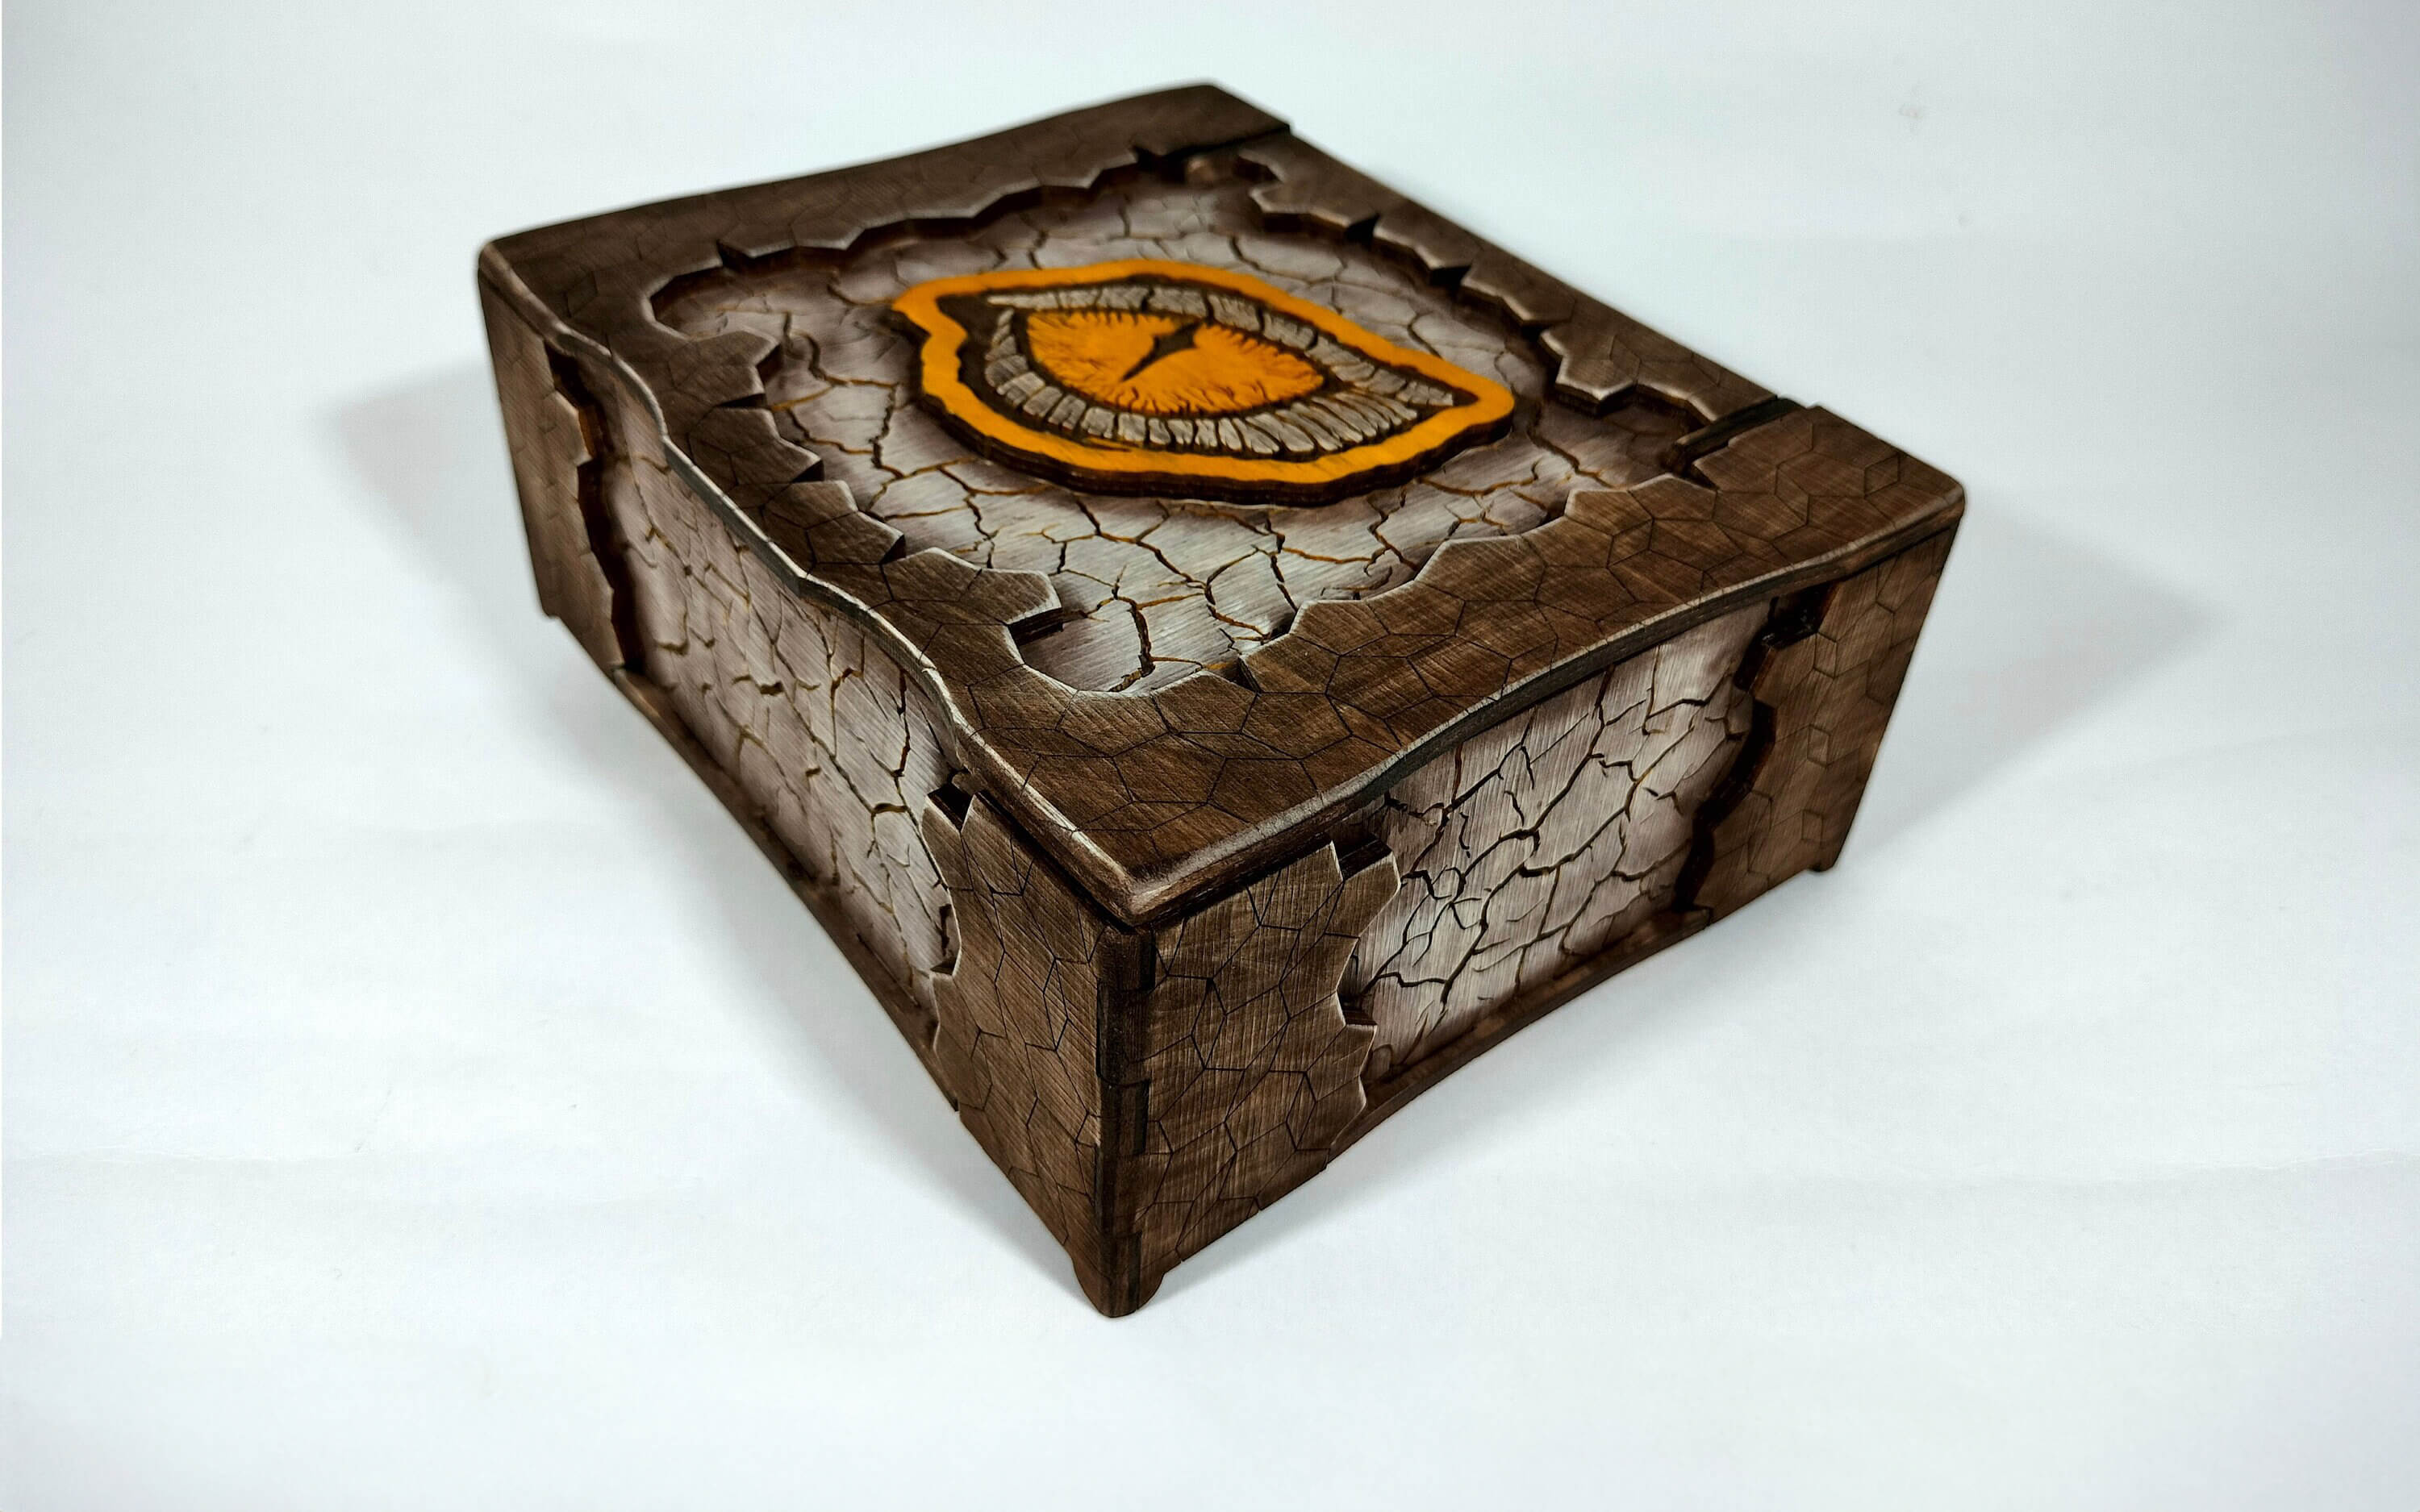 Handcrafted Jewelry Box with Motif in Wood Relief